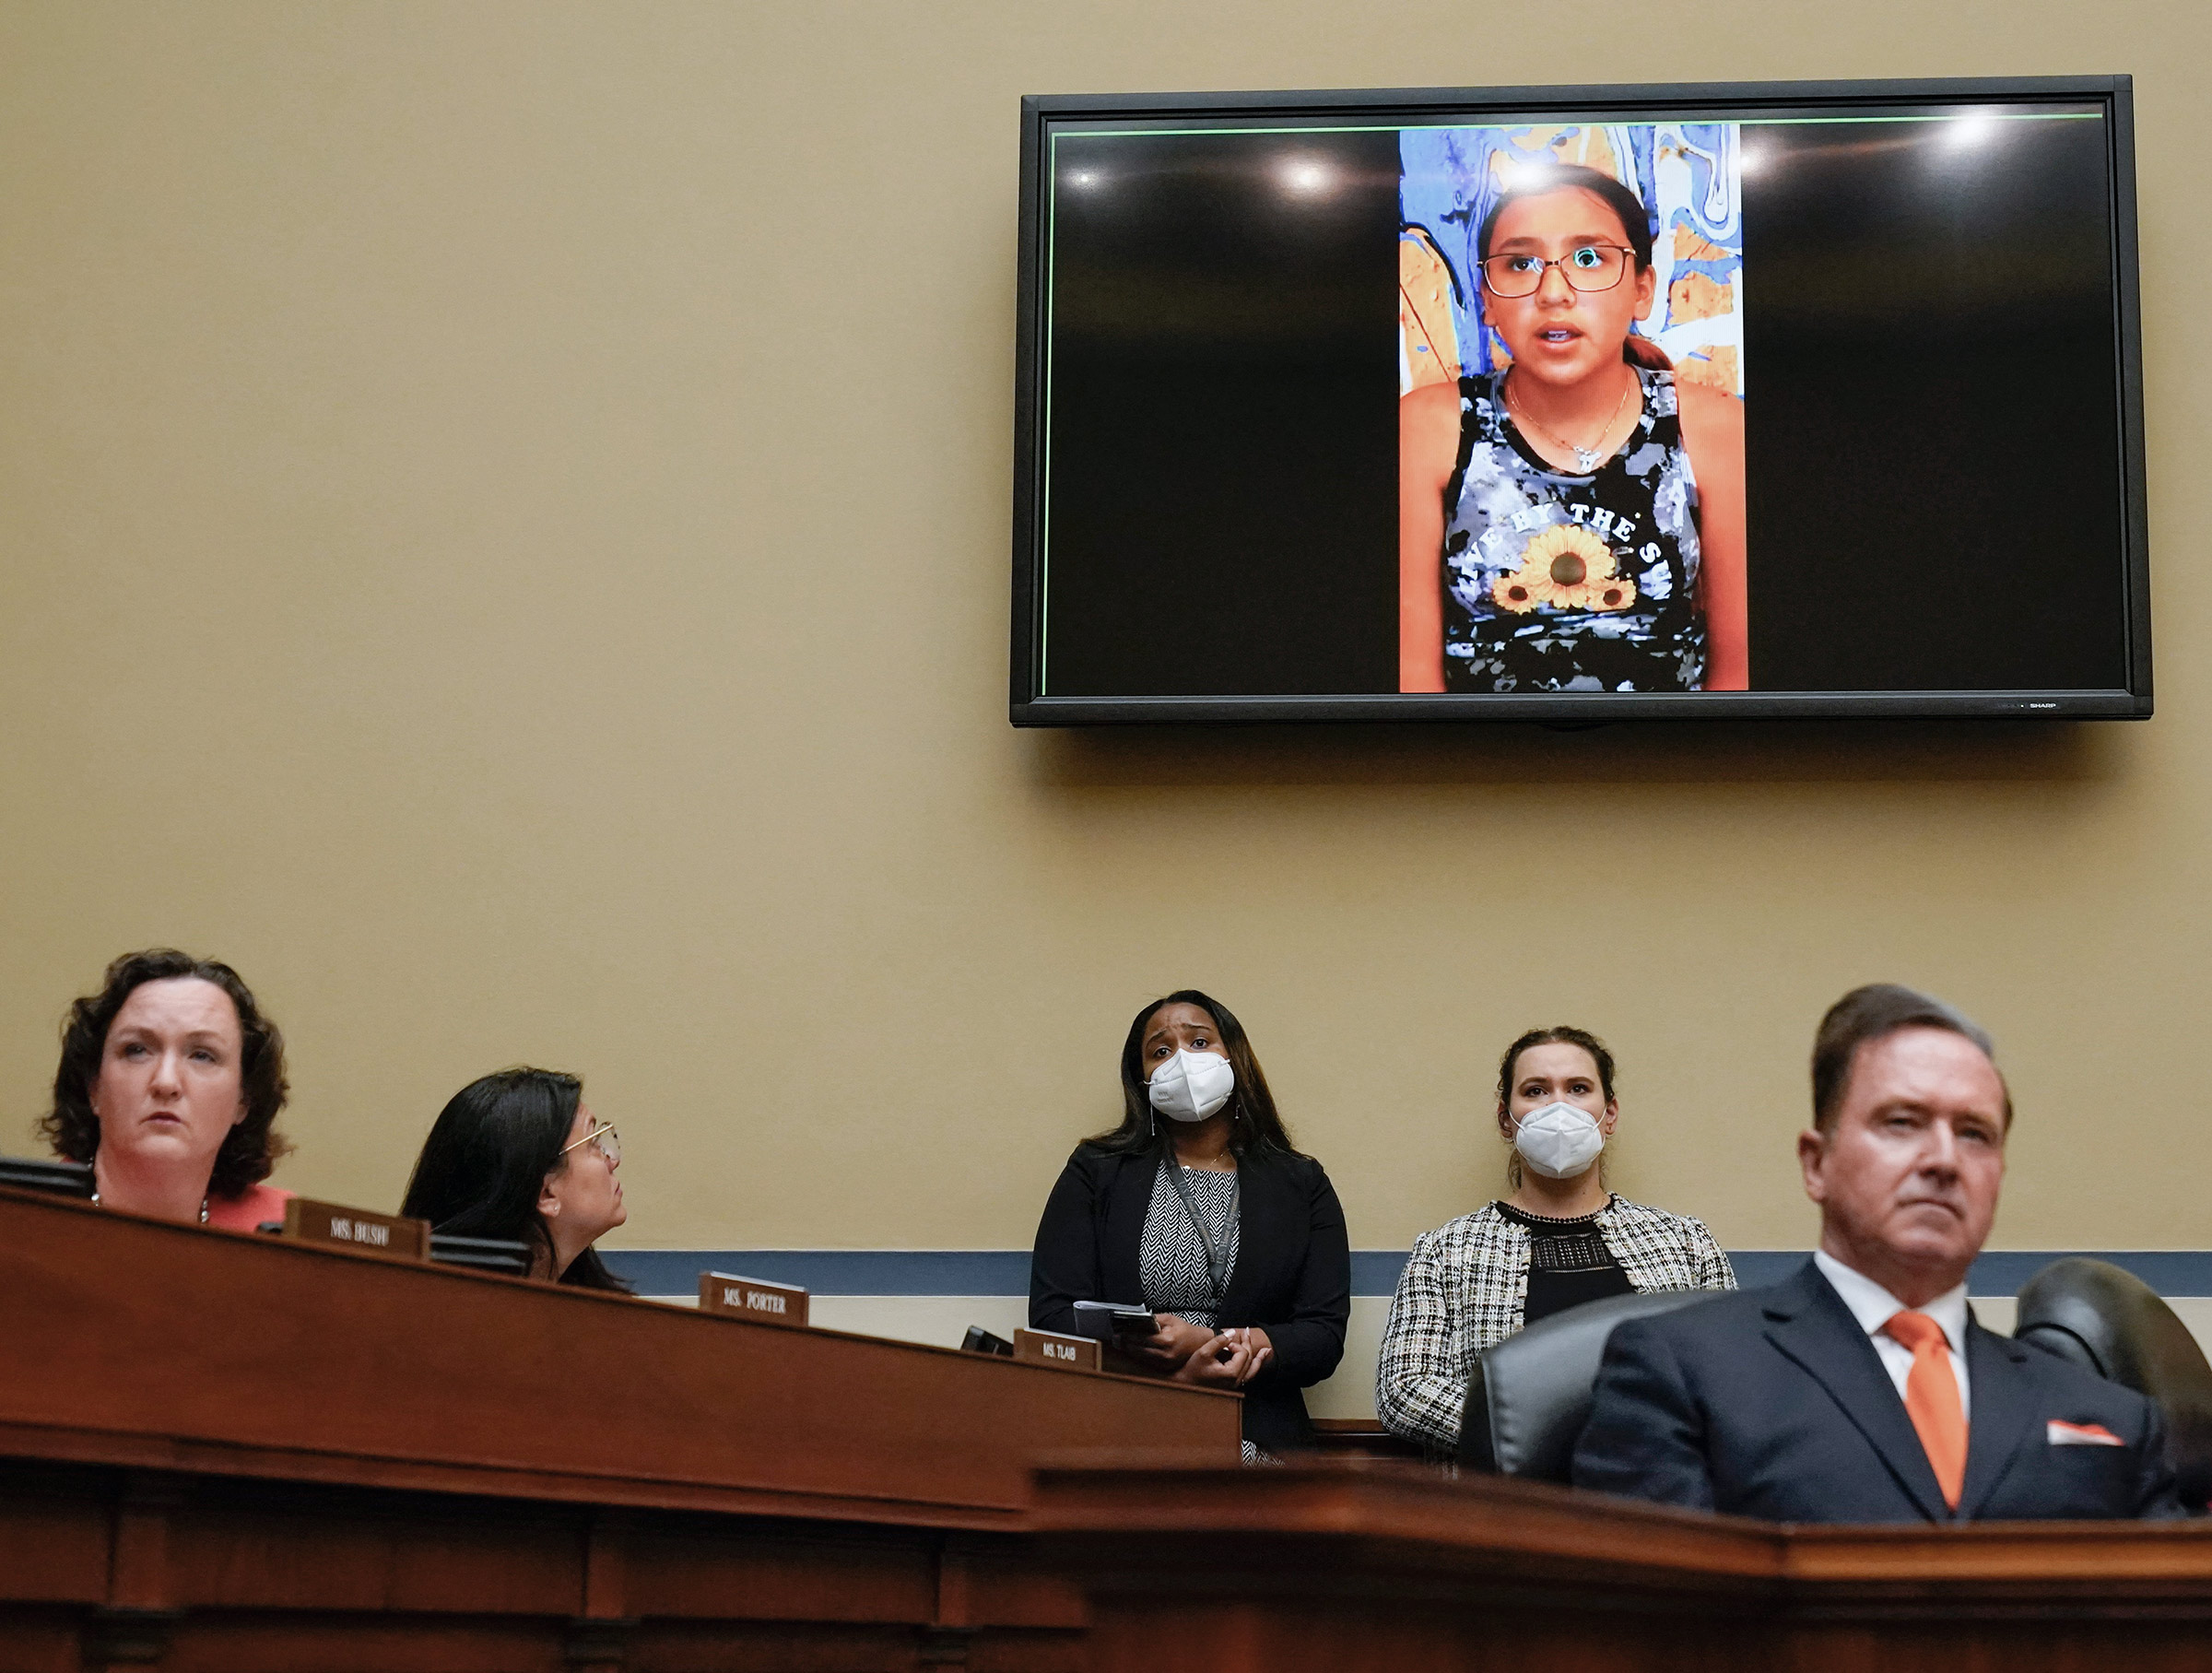 Miah Cerrillo, a fourth grade student at Robb Elementary School in Uvalde, Texas, and survivor of the mass shooting appears on a screen during a House Committee